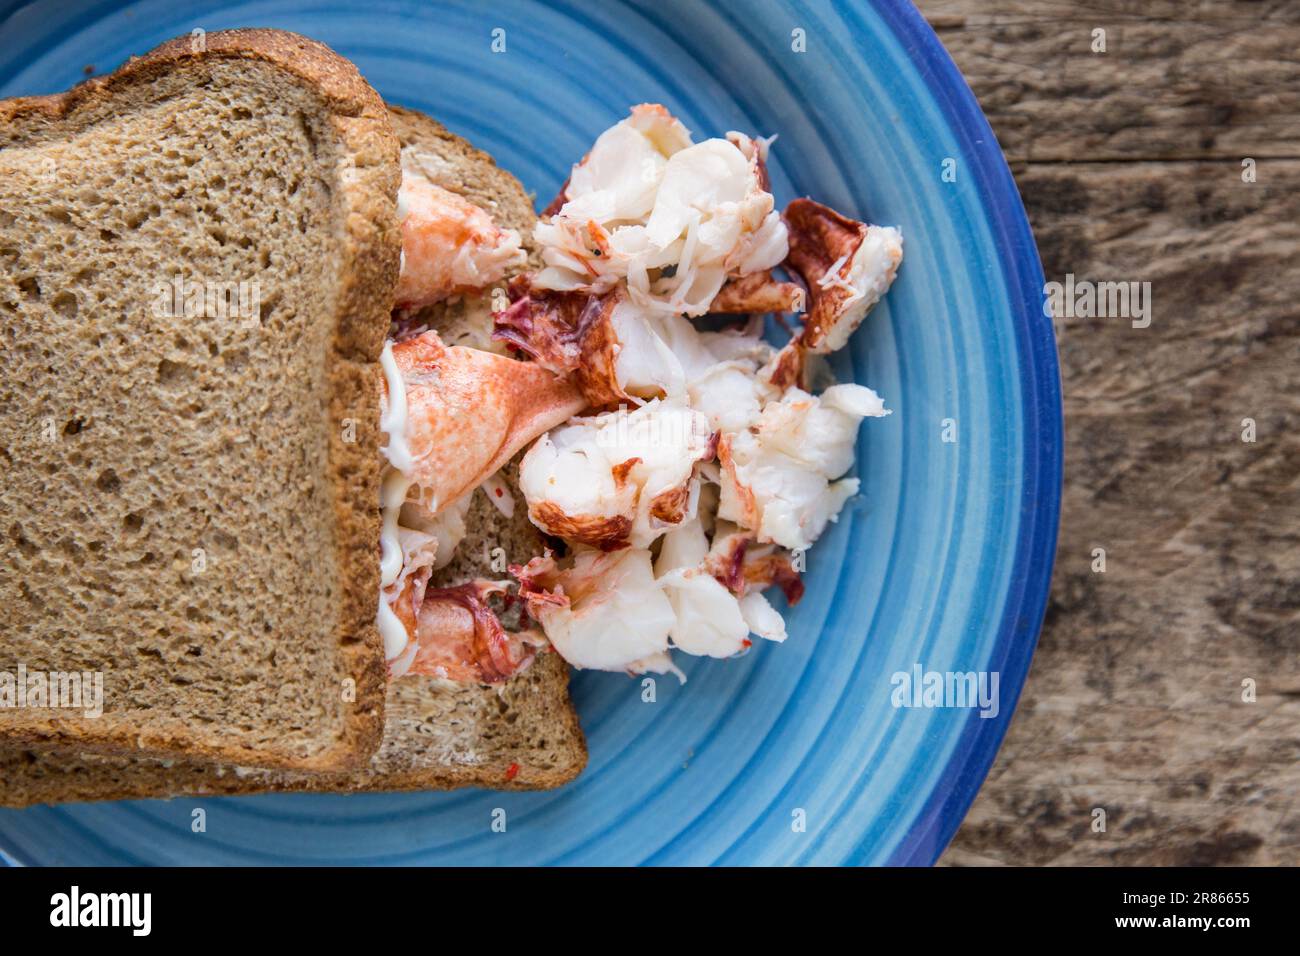 Lobster meat, Homarus gammarus, from a lobster caught in the English Channel. It has been boiled, chopped and served in a brown bread sandwich with so Stock Photo